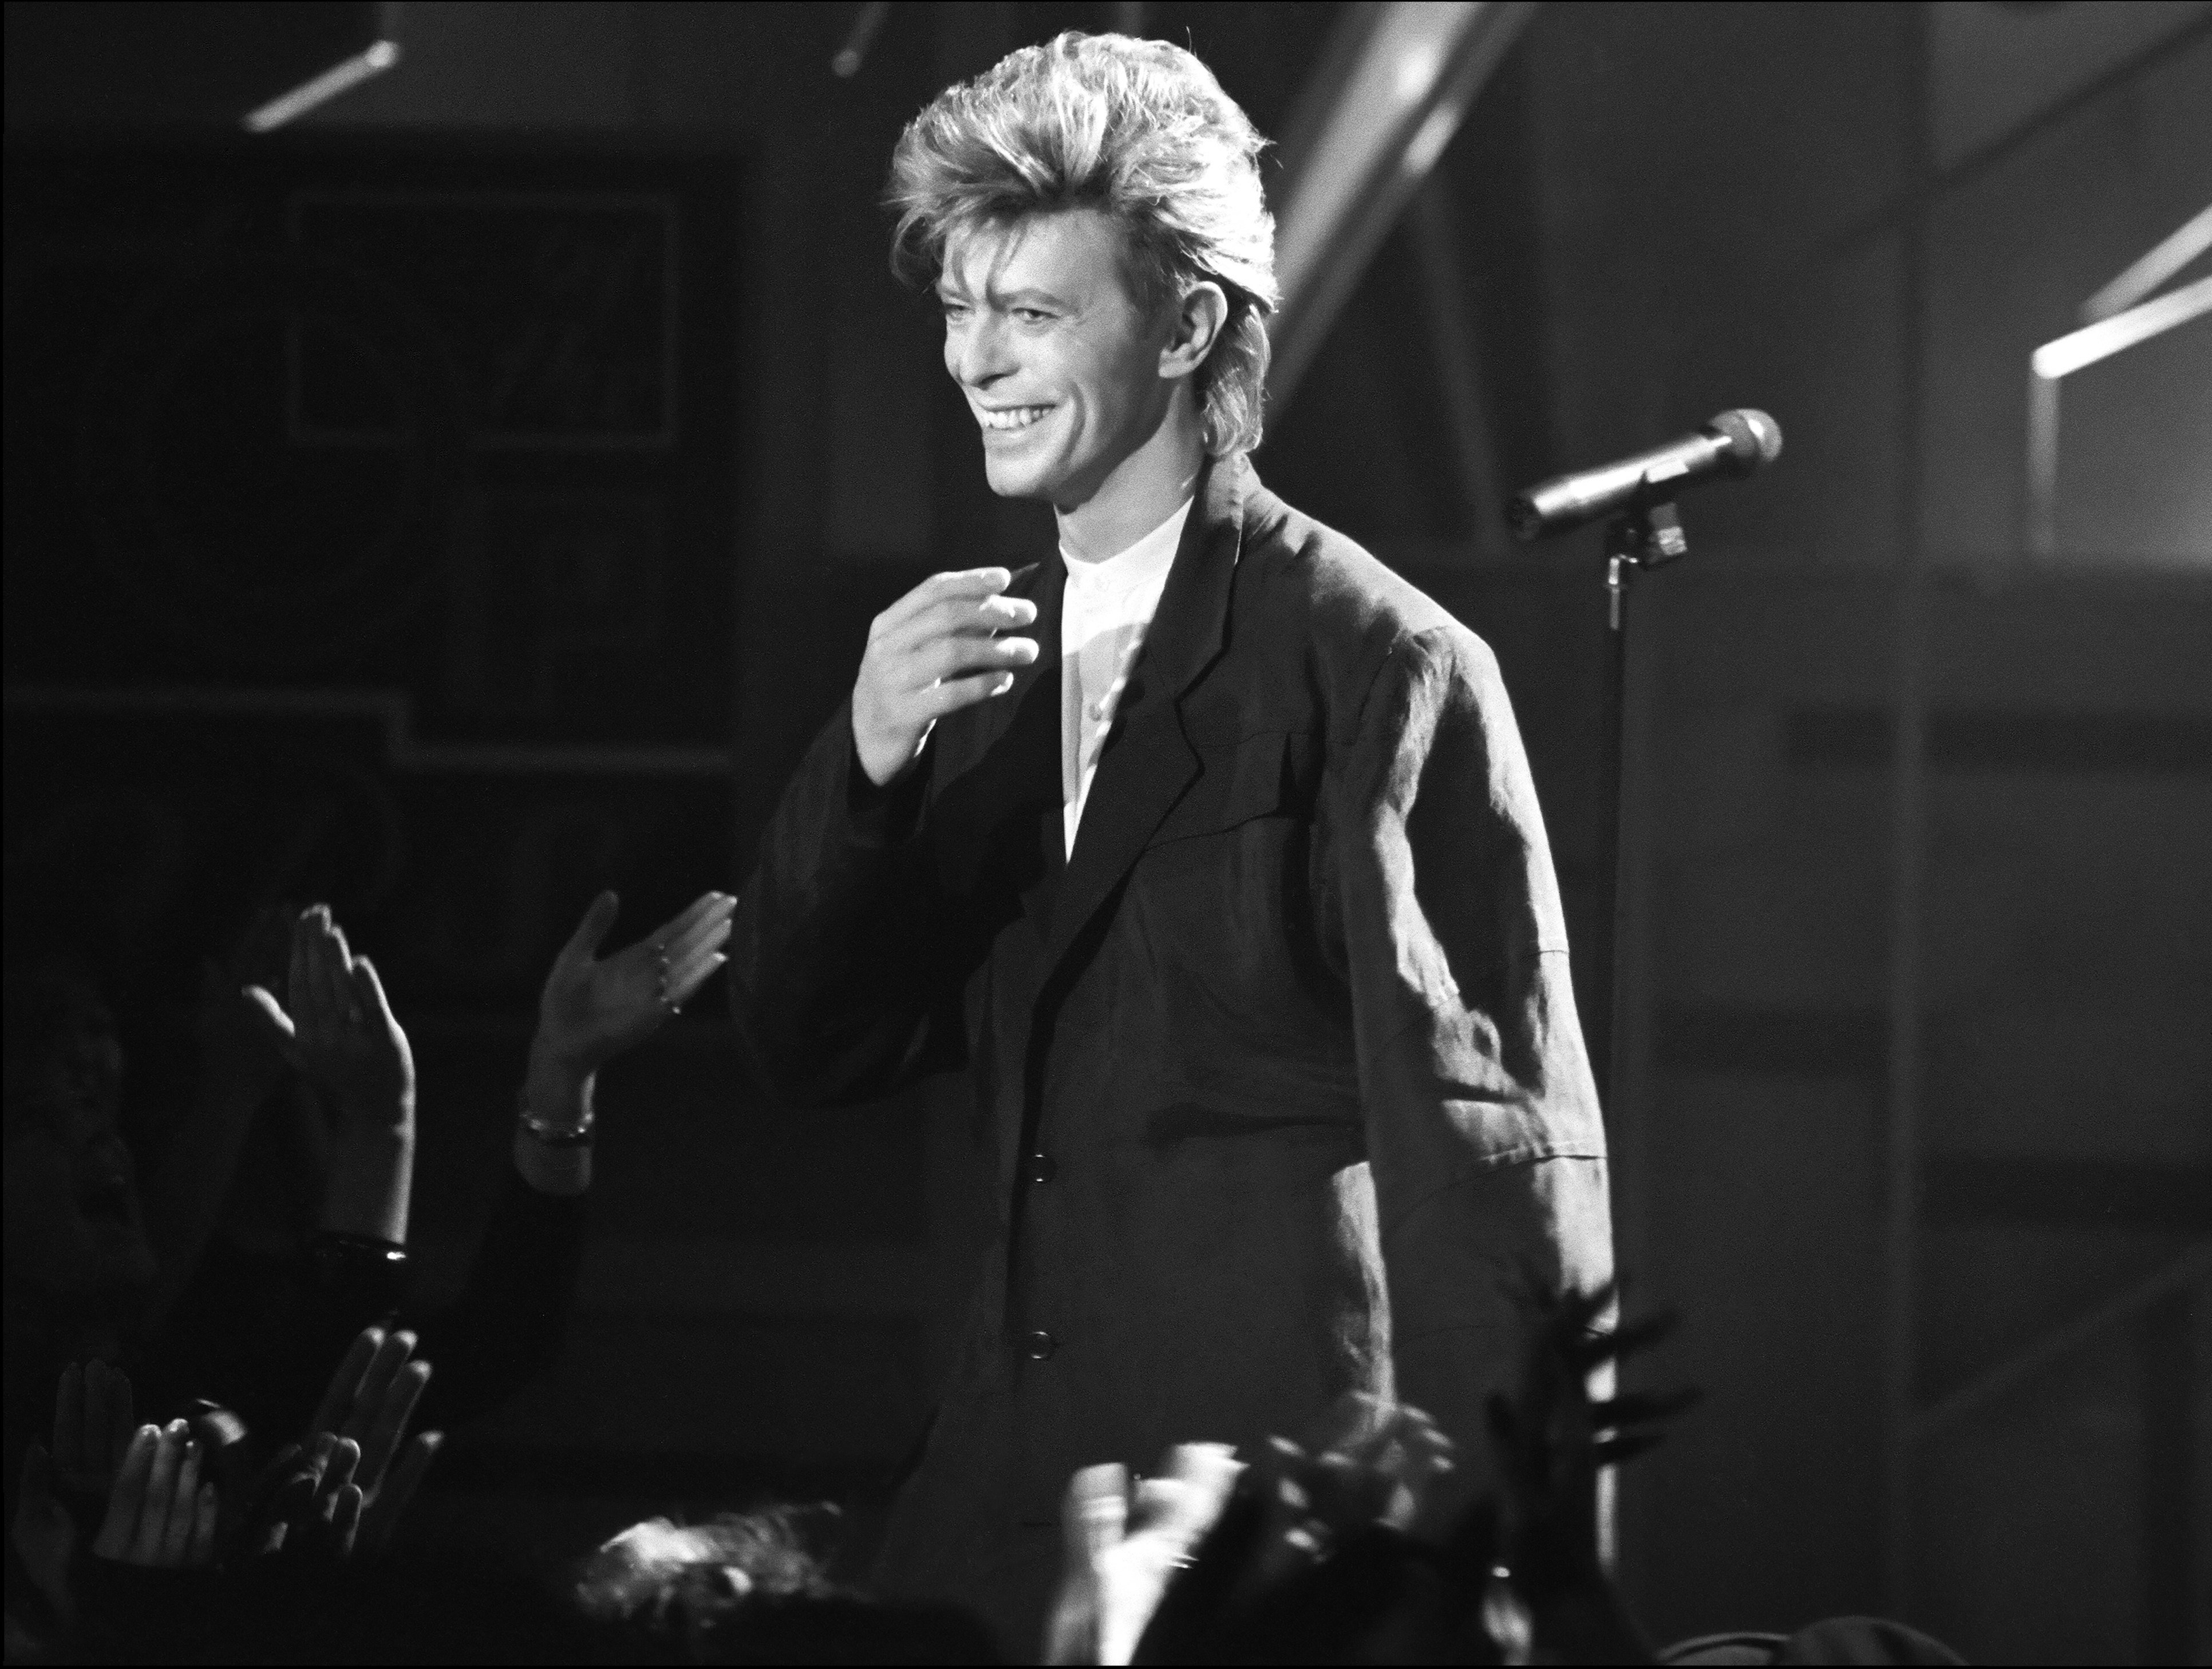 David Bowie standing near a microphone